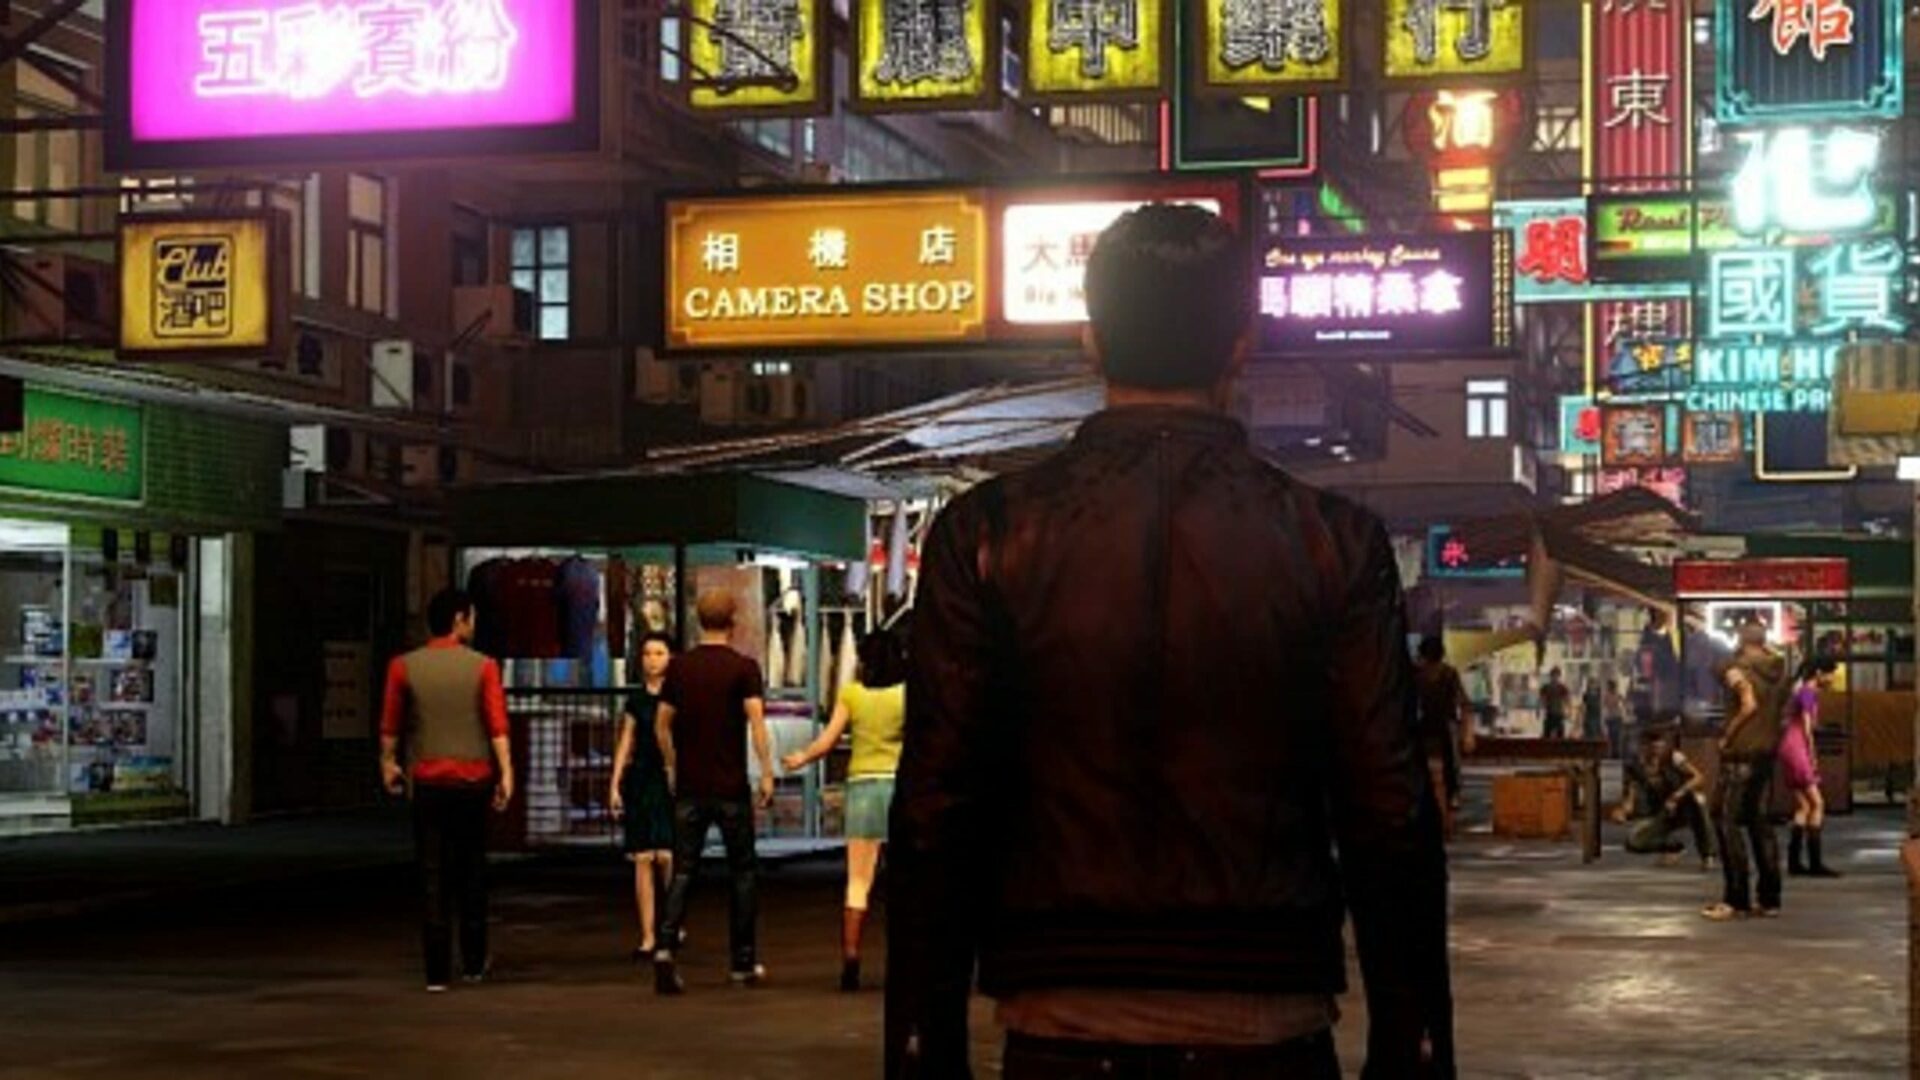 Buy cheap Sleeping Dogs: Definitive Edition cd key - lowest price